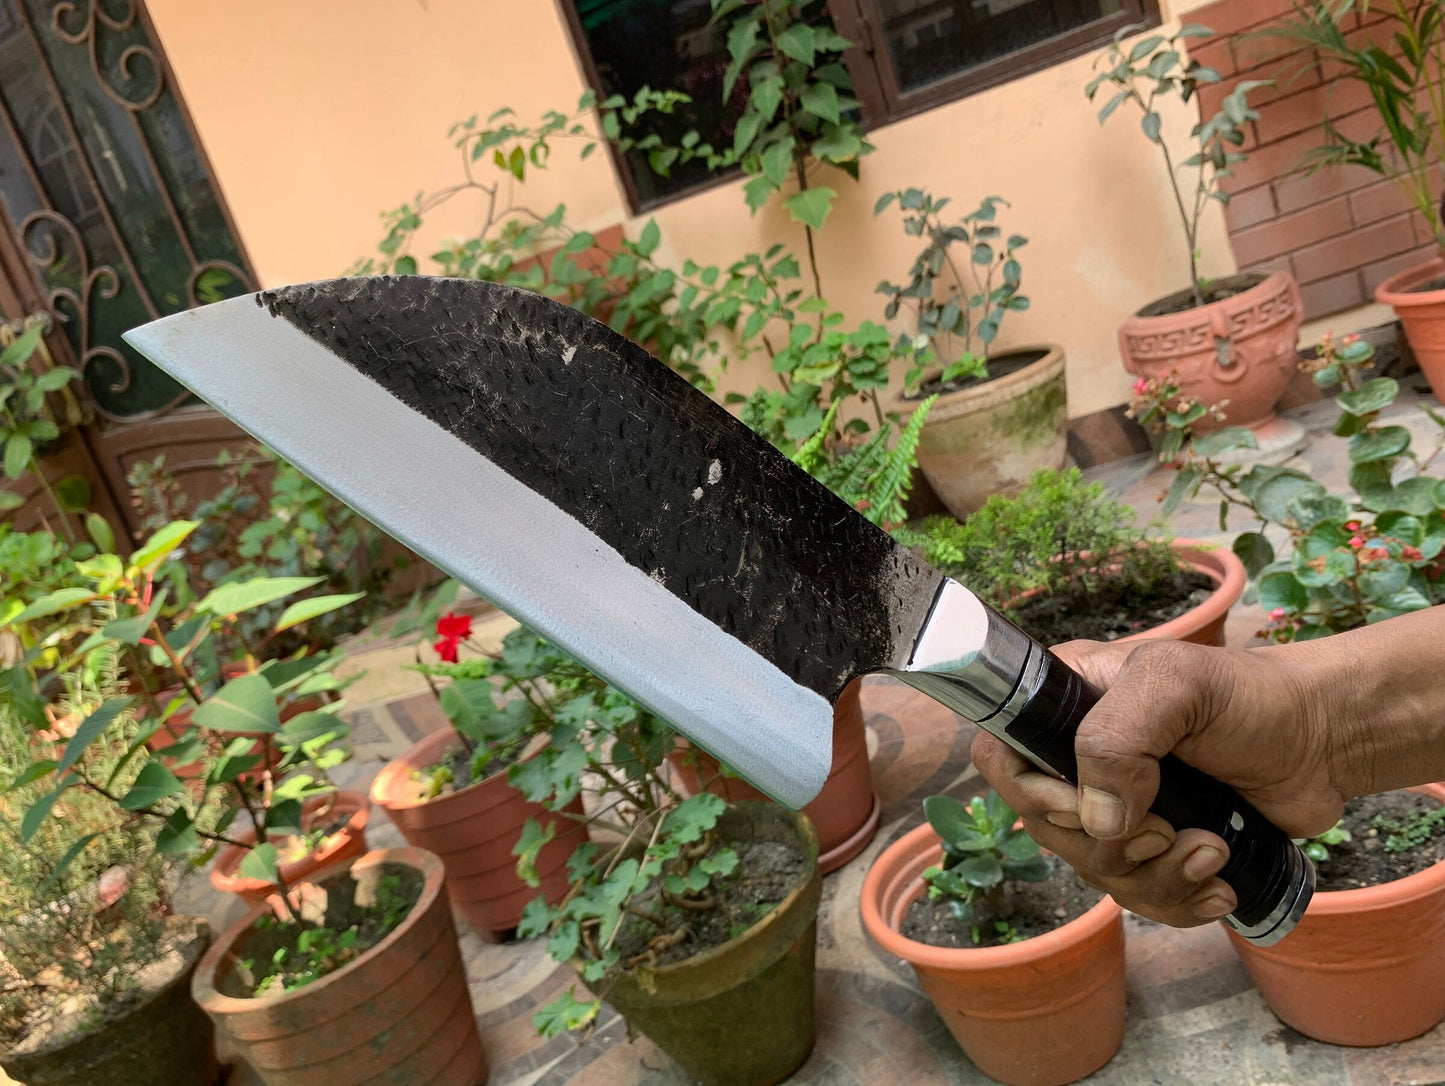 Gurkha Nepal Hand Forged Heavy Duty Extra Strong High Tempered Carbon Steel 9-Inch Blade Kitchen Khukuri Knife Full Tang